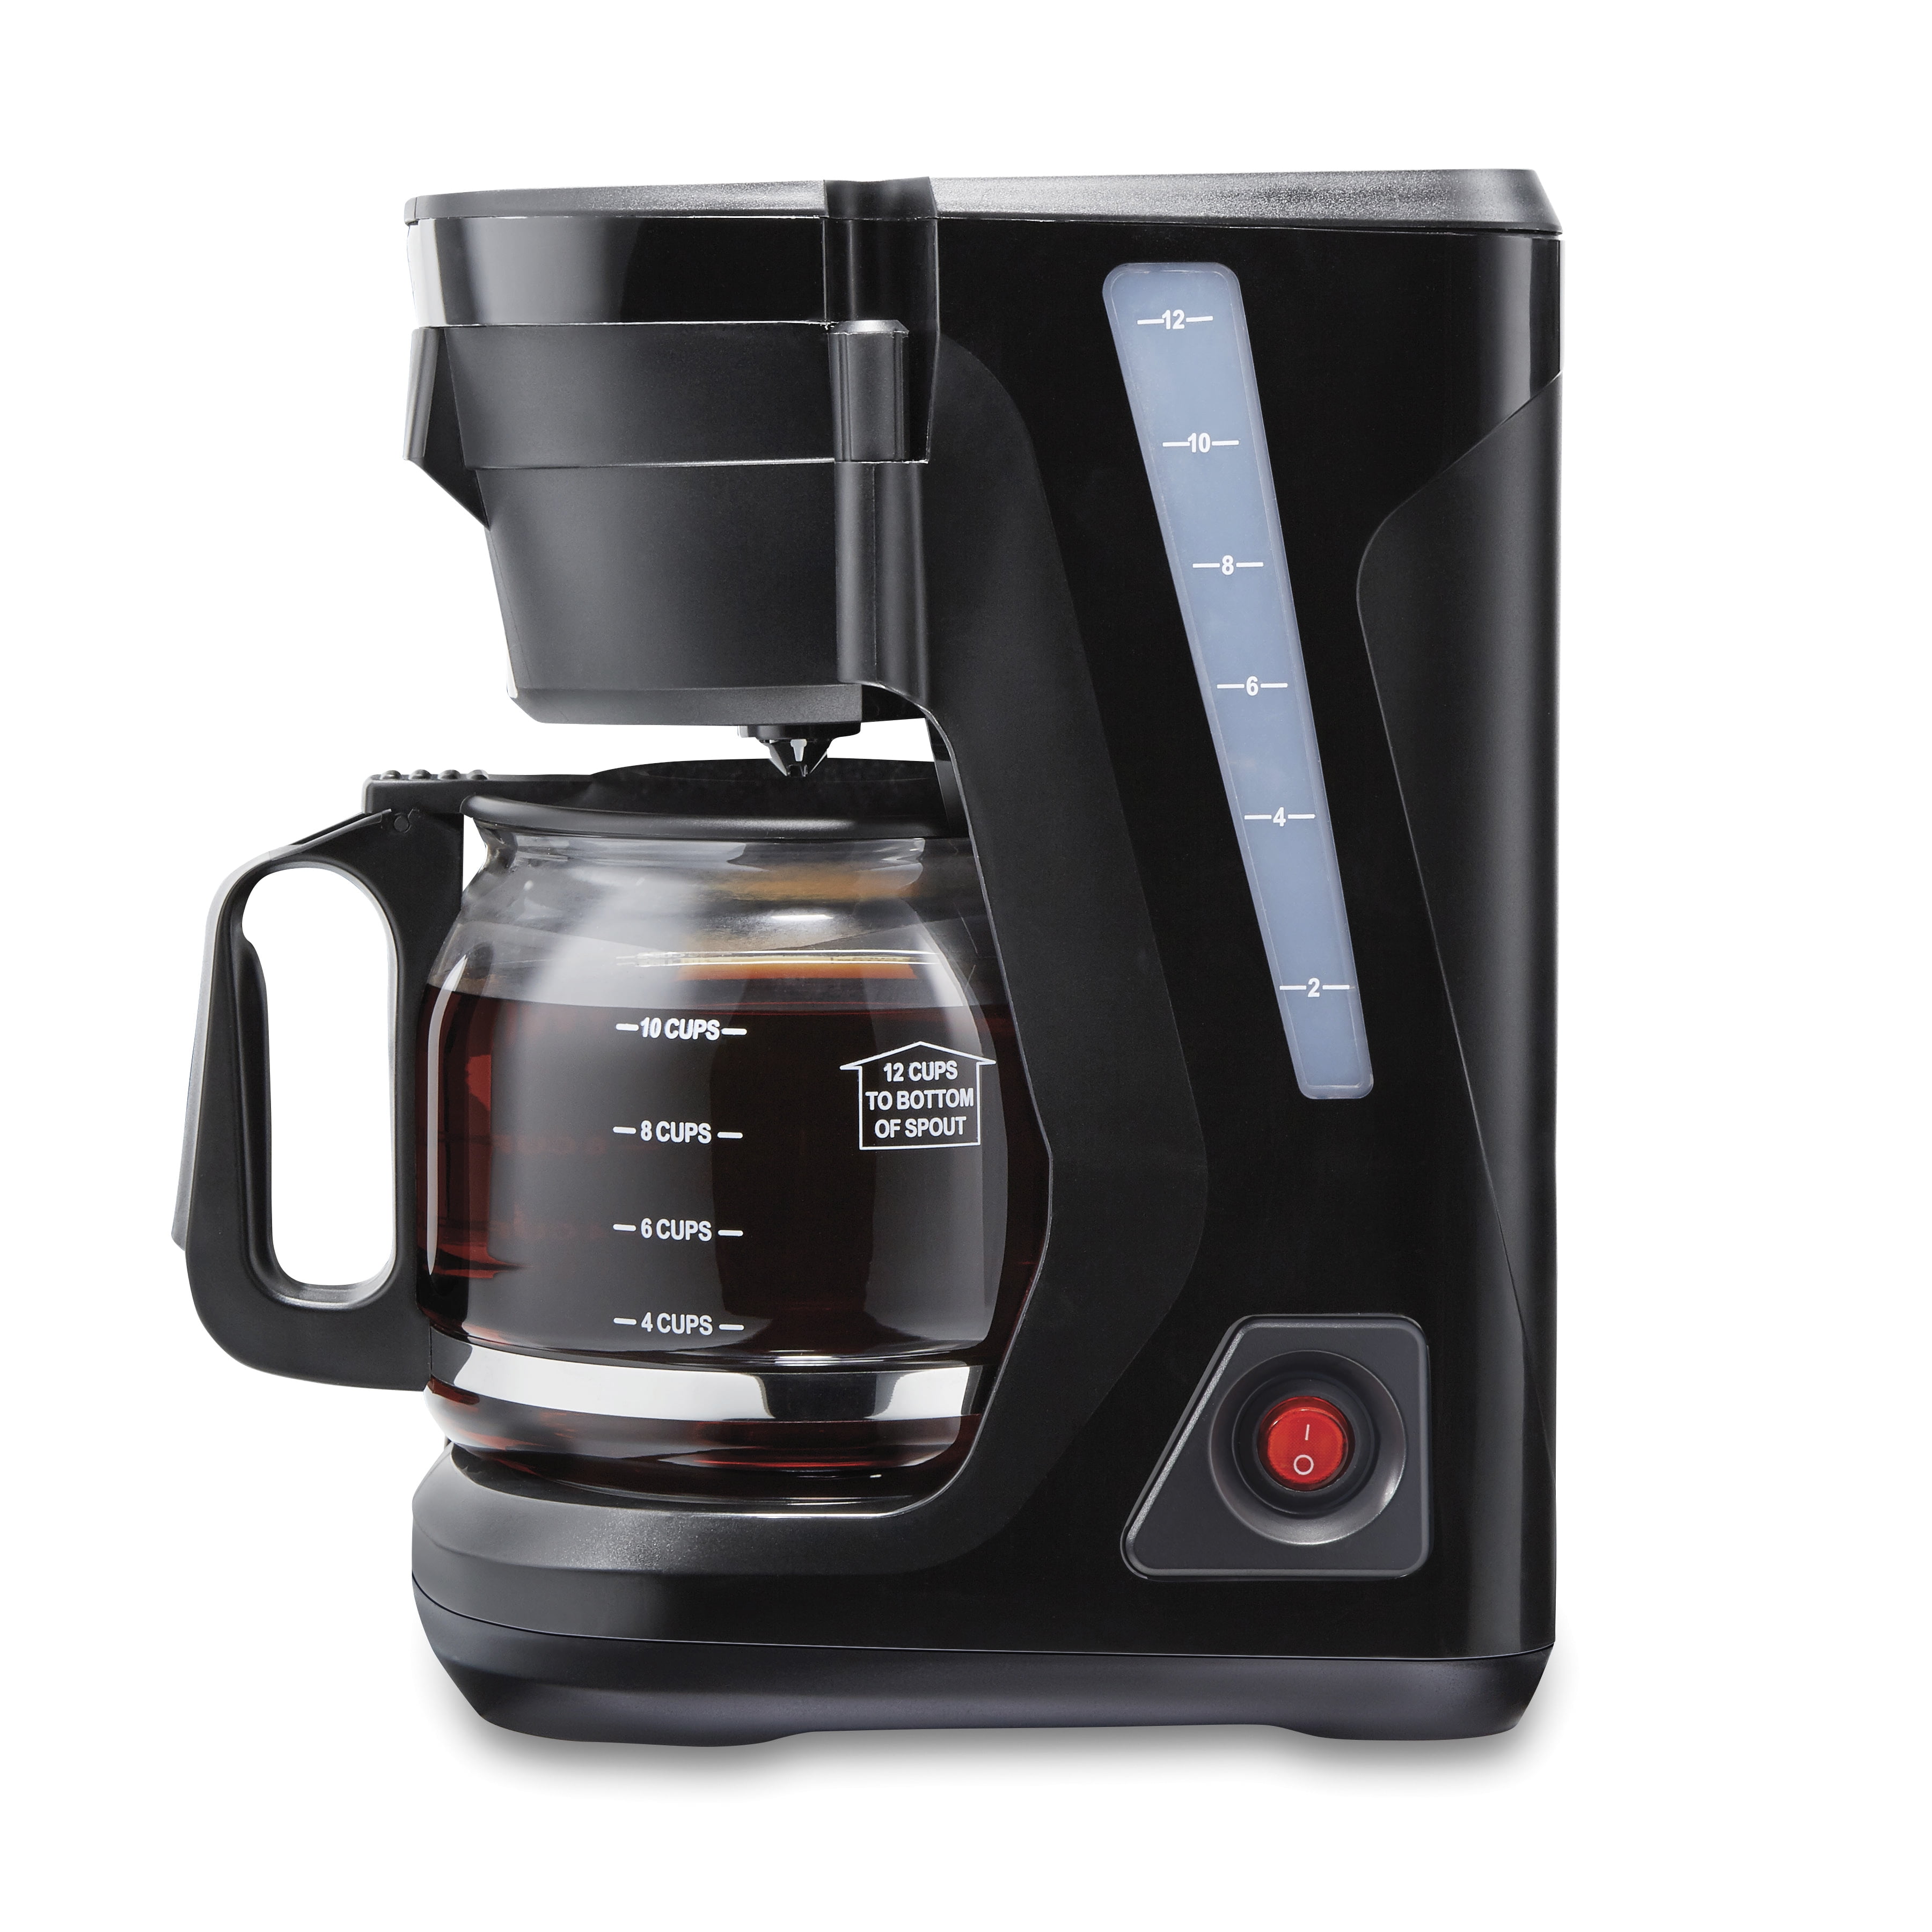 50 Cup Coffee Maker for Rent in NYC